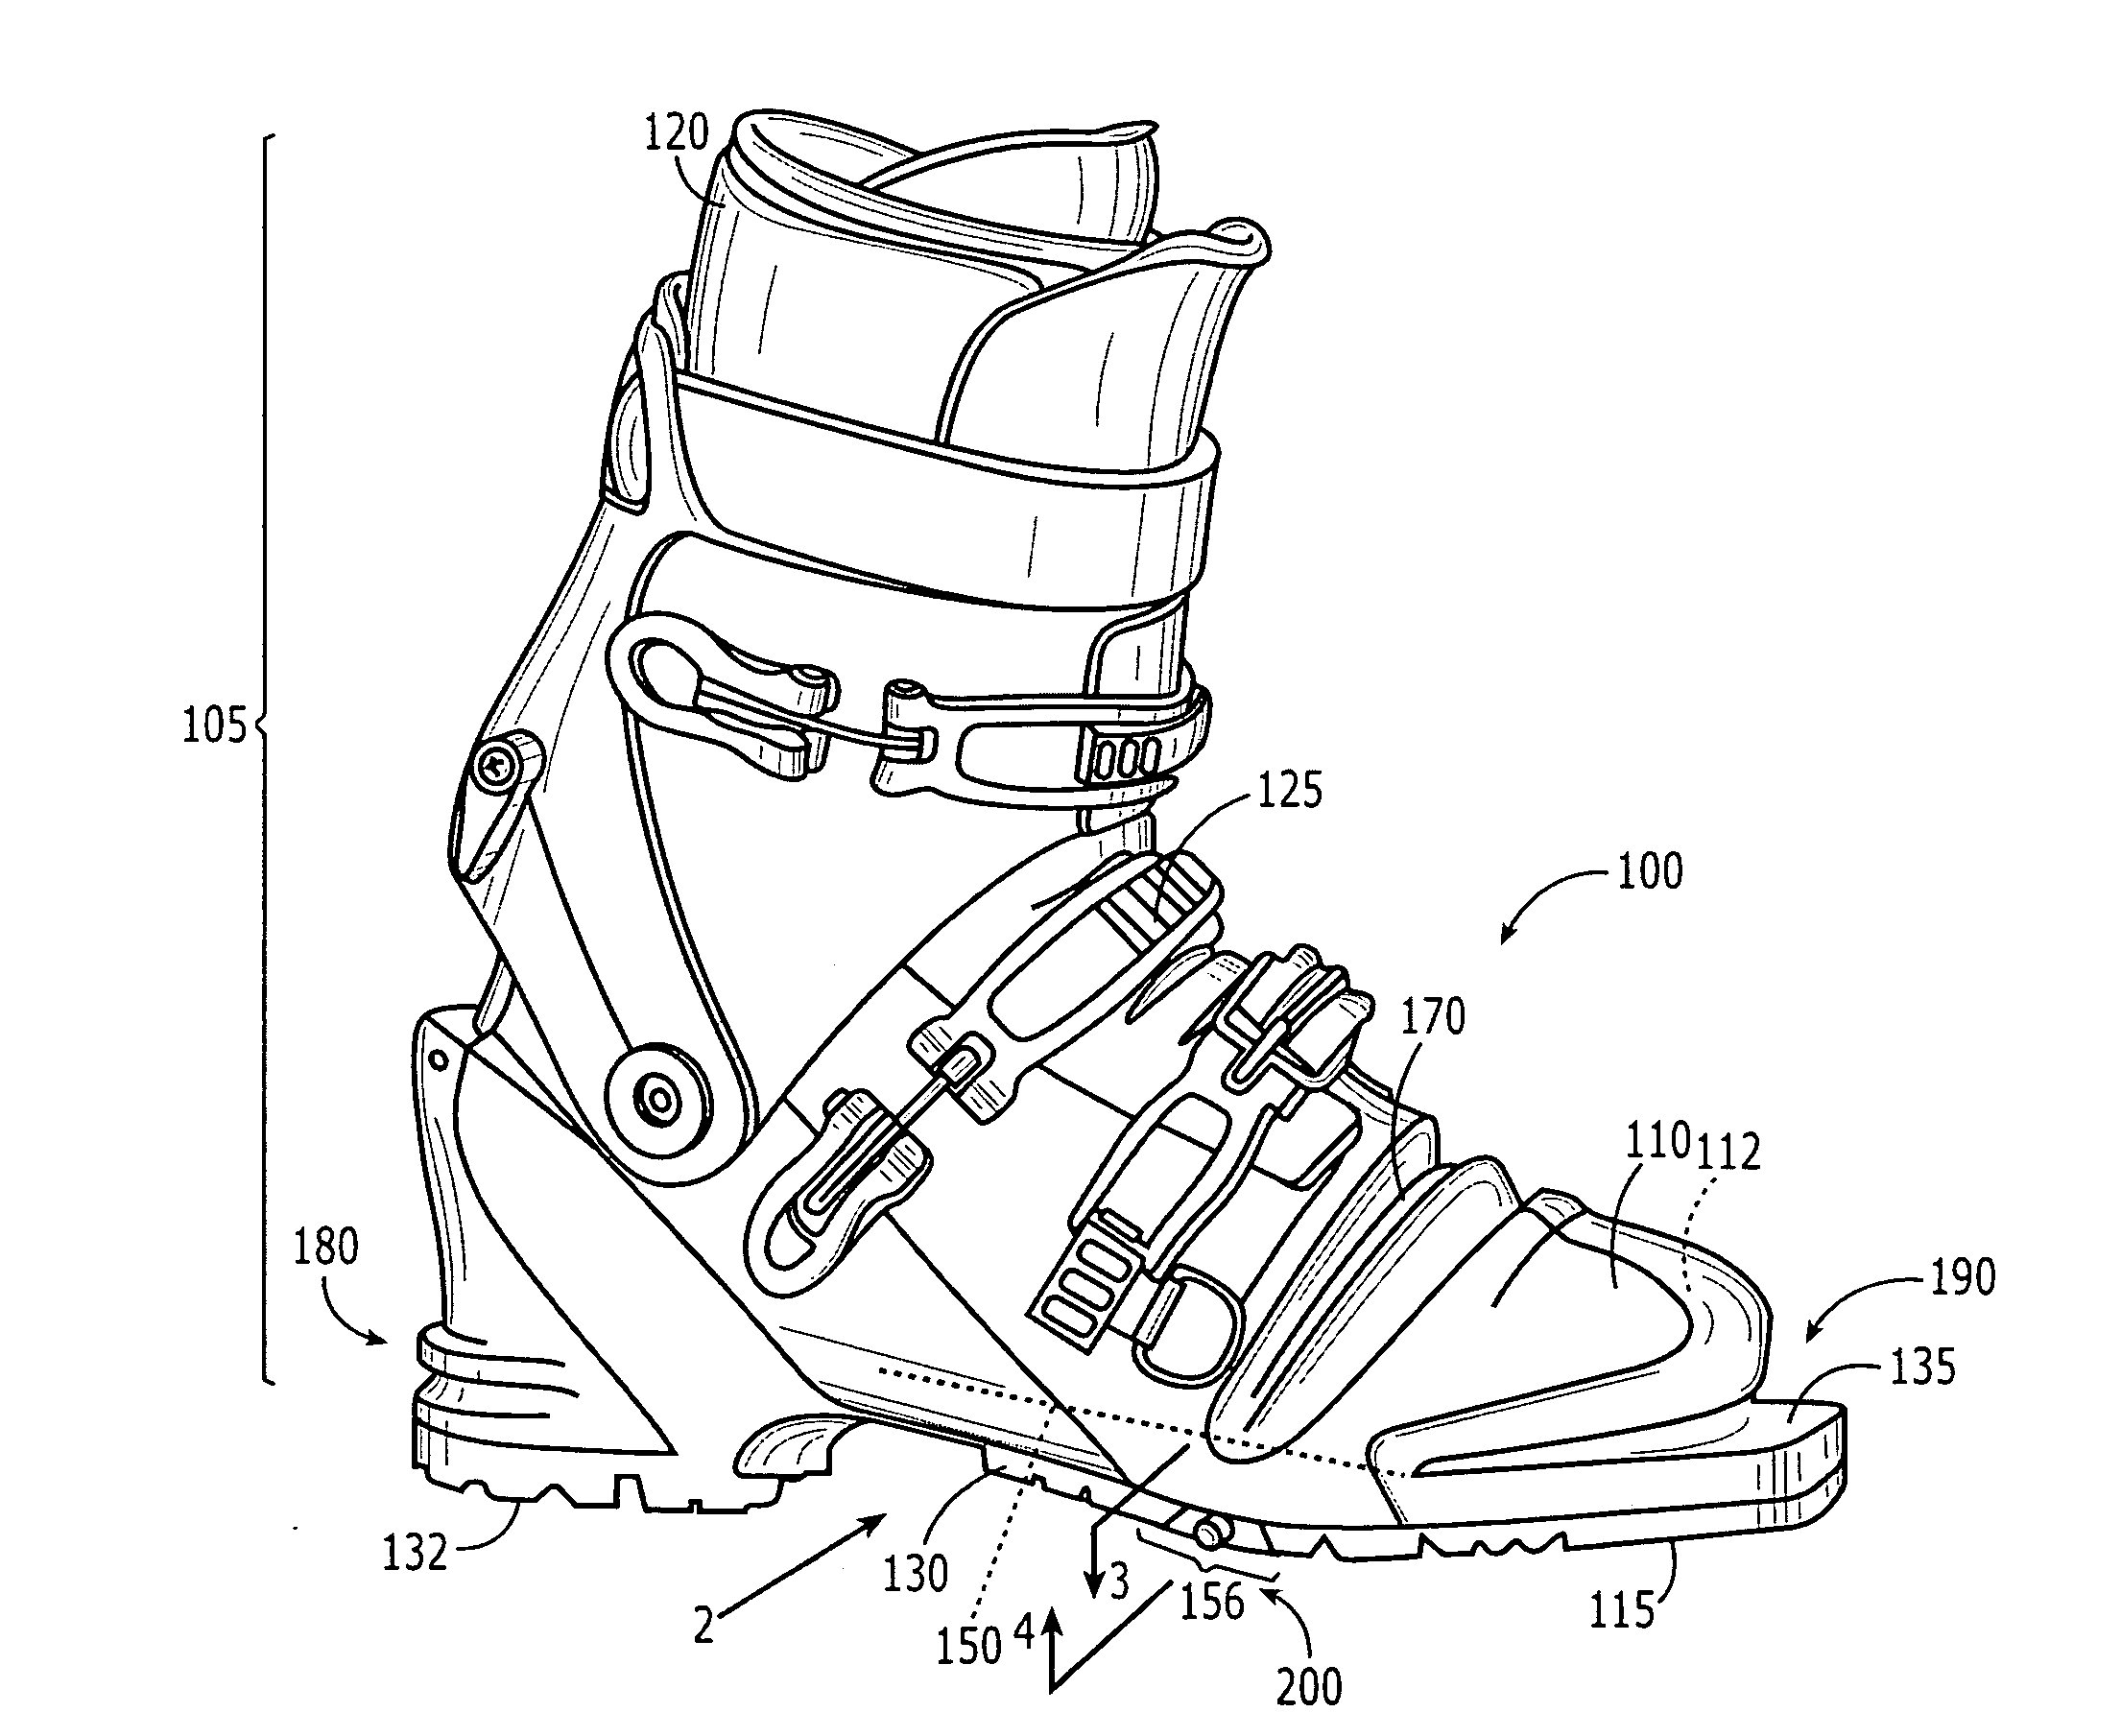 Boot binding interface system